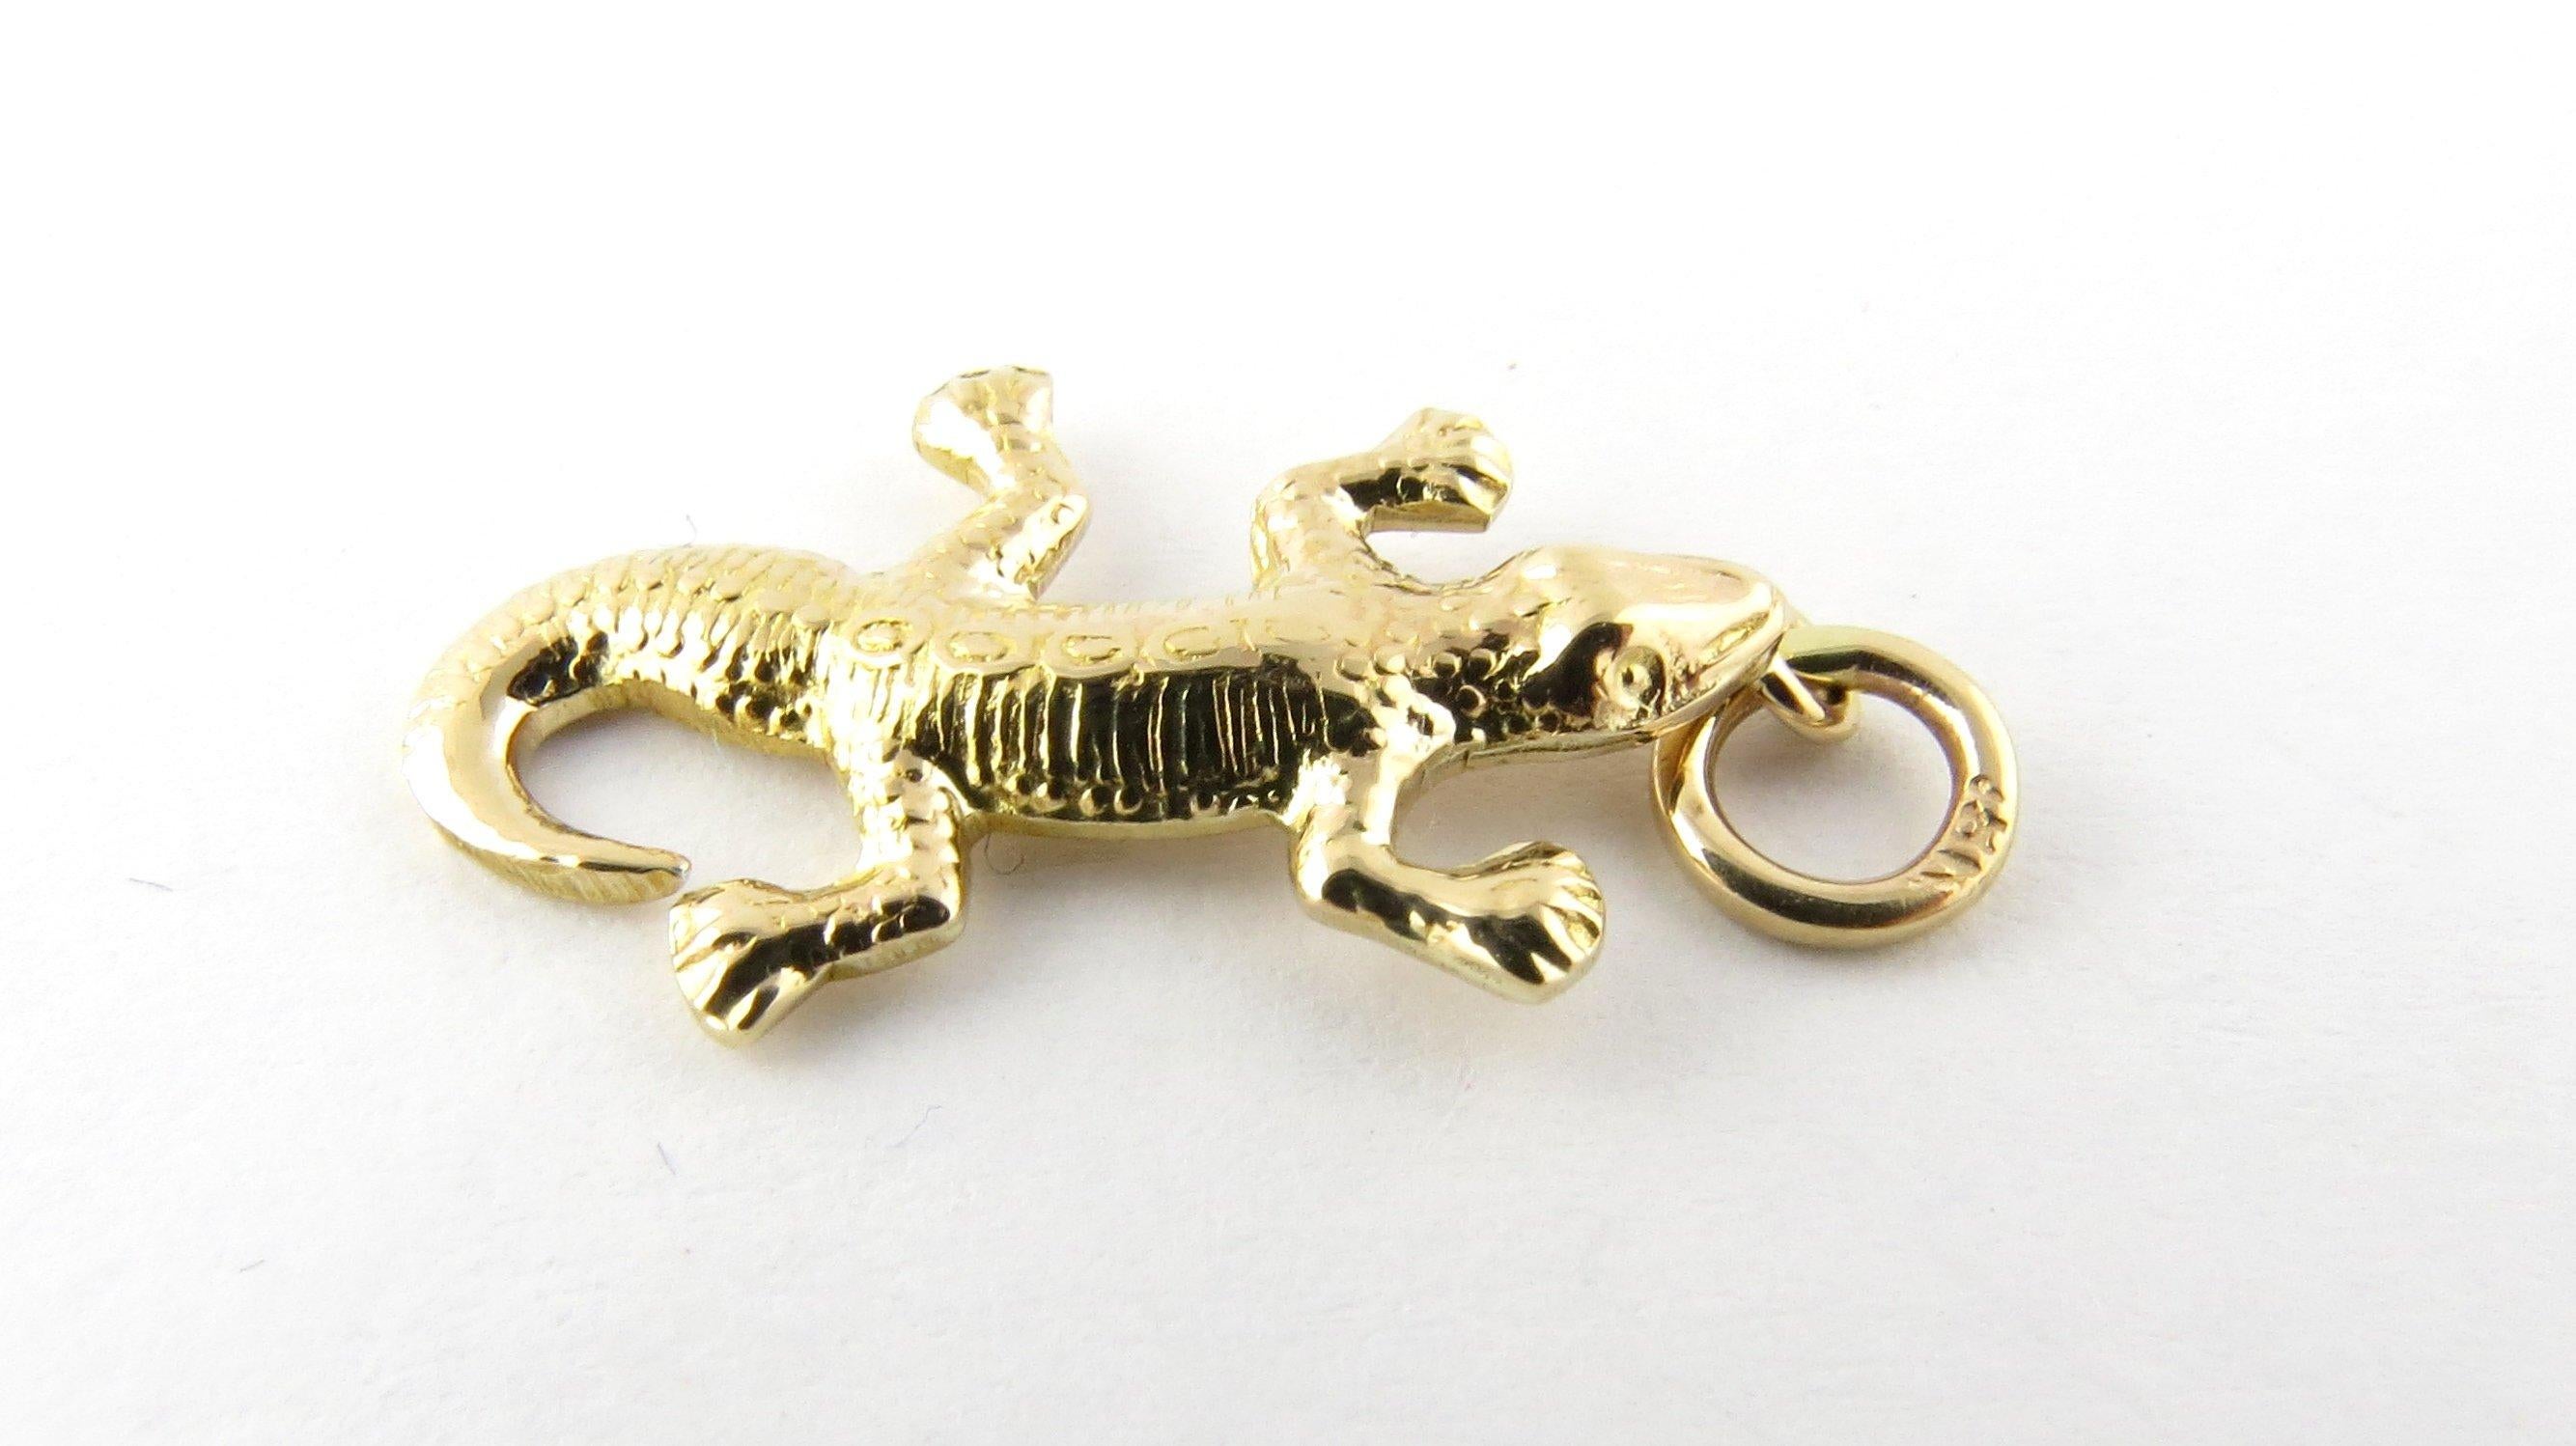 Vintage 18 Karat Yellow Gold Lizard Charm
This little fellow is sure to bring you good luck! 
This adorable charm features a miniature lizard meticulously detailed in 14K yellow gold. 
Size: 25 mm x 15 mm (actual charm) 
Weight: 1.2 dwt. / 1.9 gr.